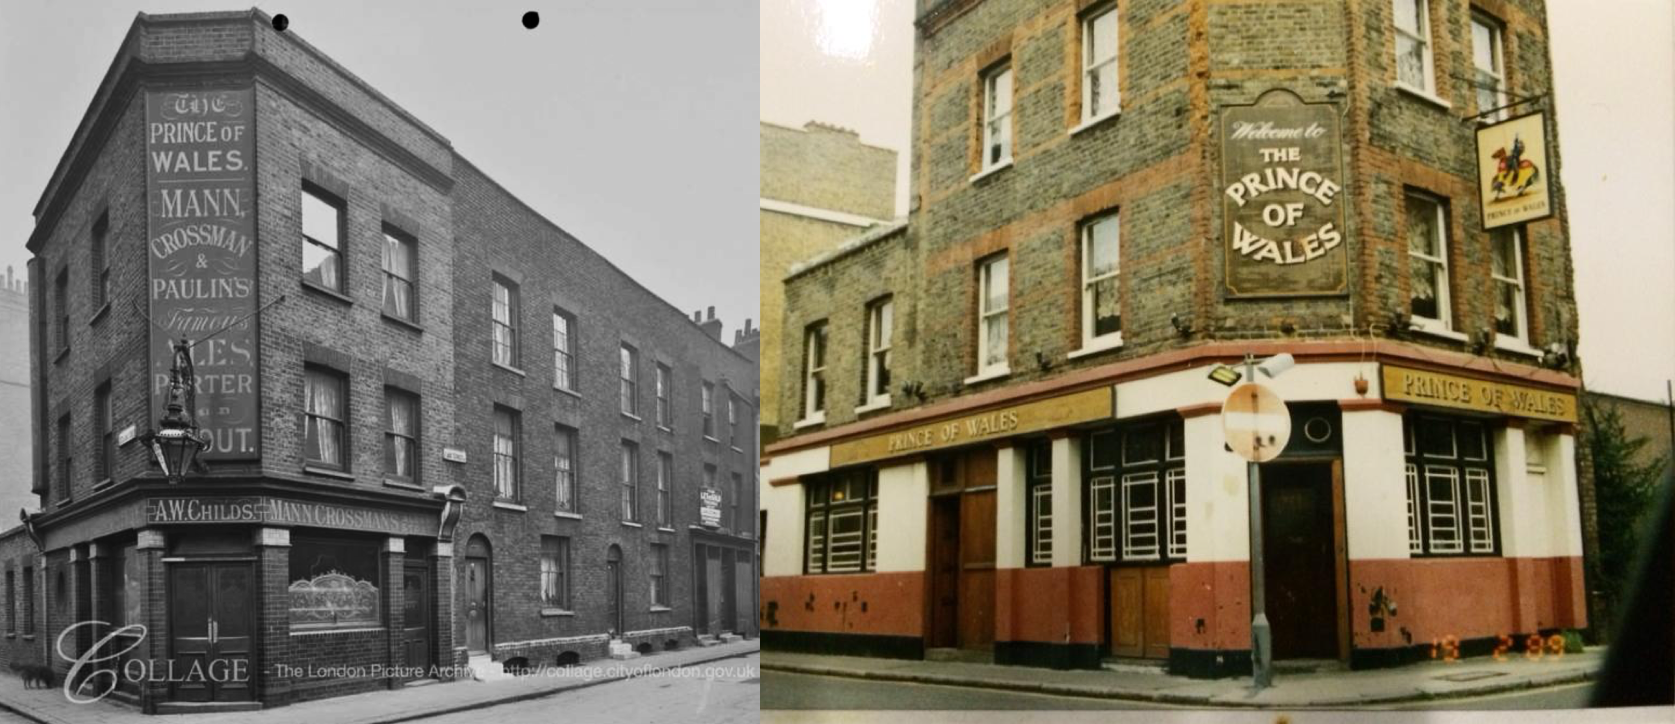 Lant Street, The Prince of Wales, was owned by Freddie Foreman in the 1960s & 1970s. X.png